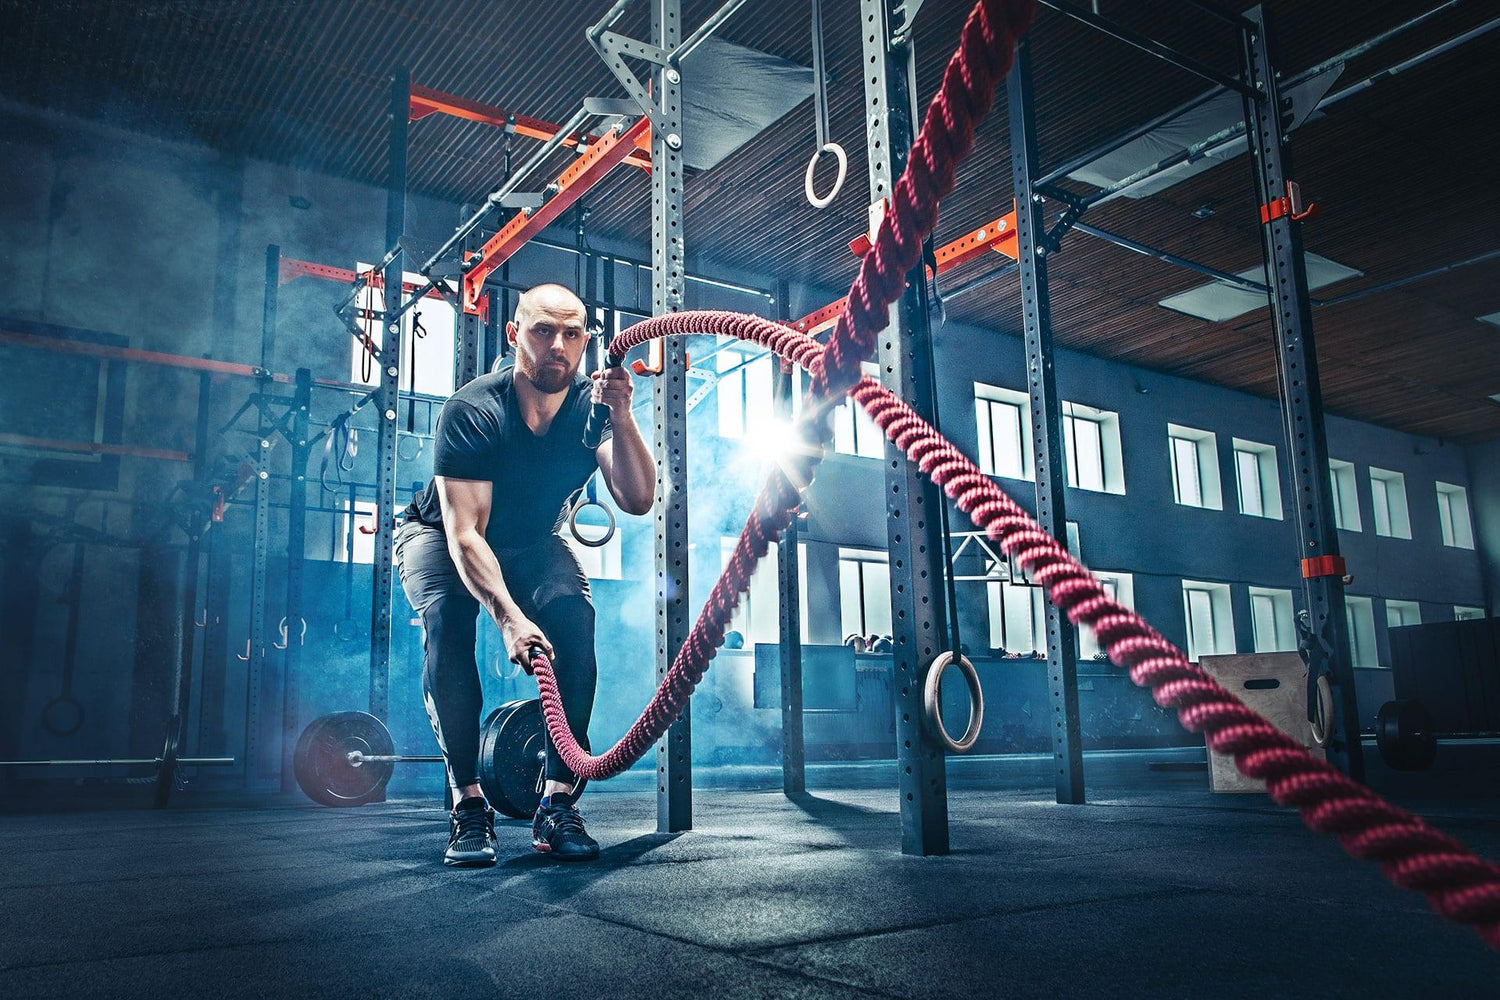 Man in crossfit gym using battle ropes